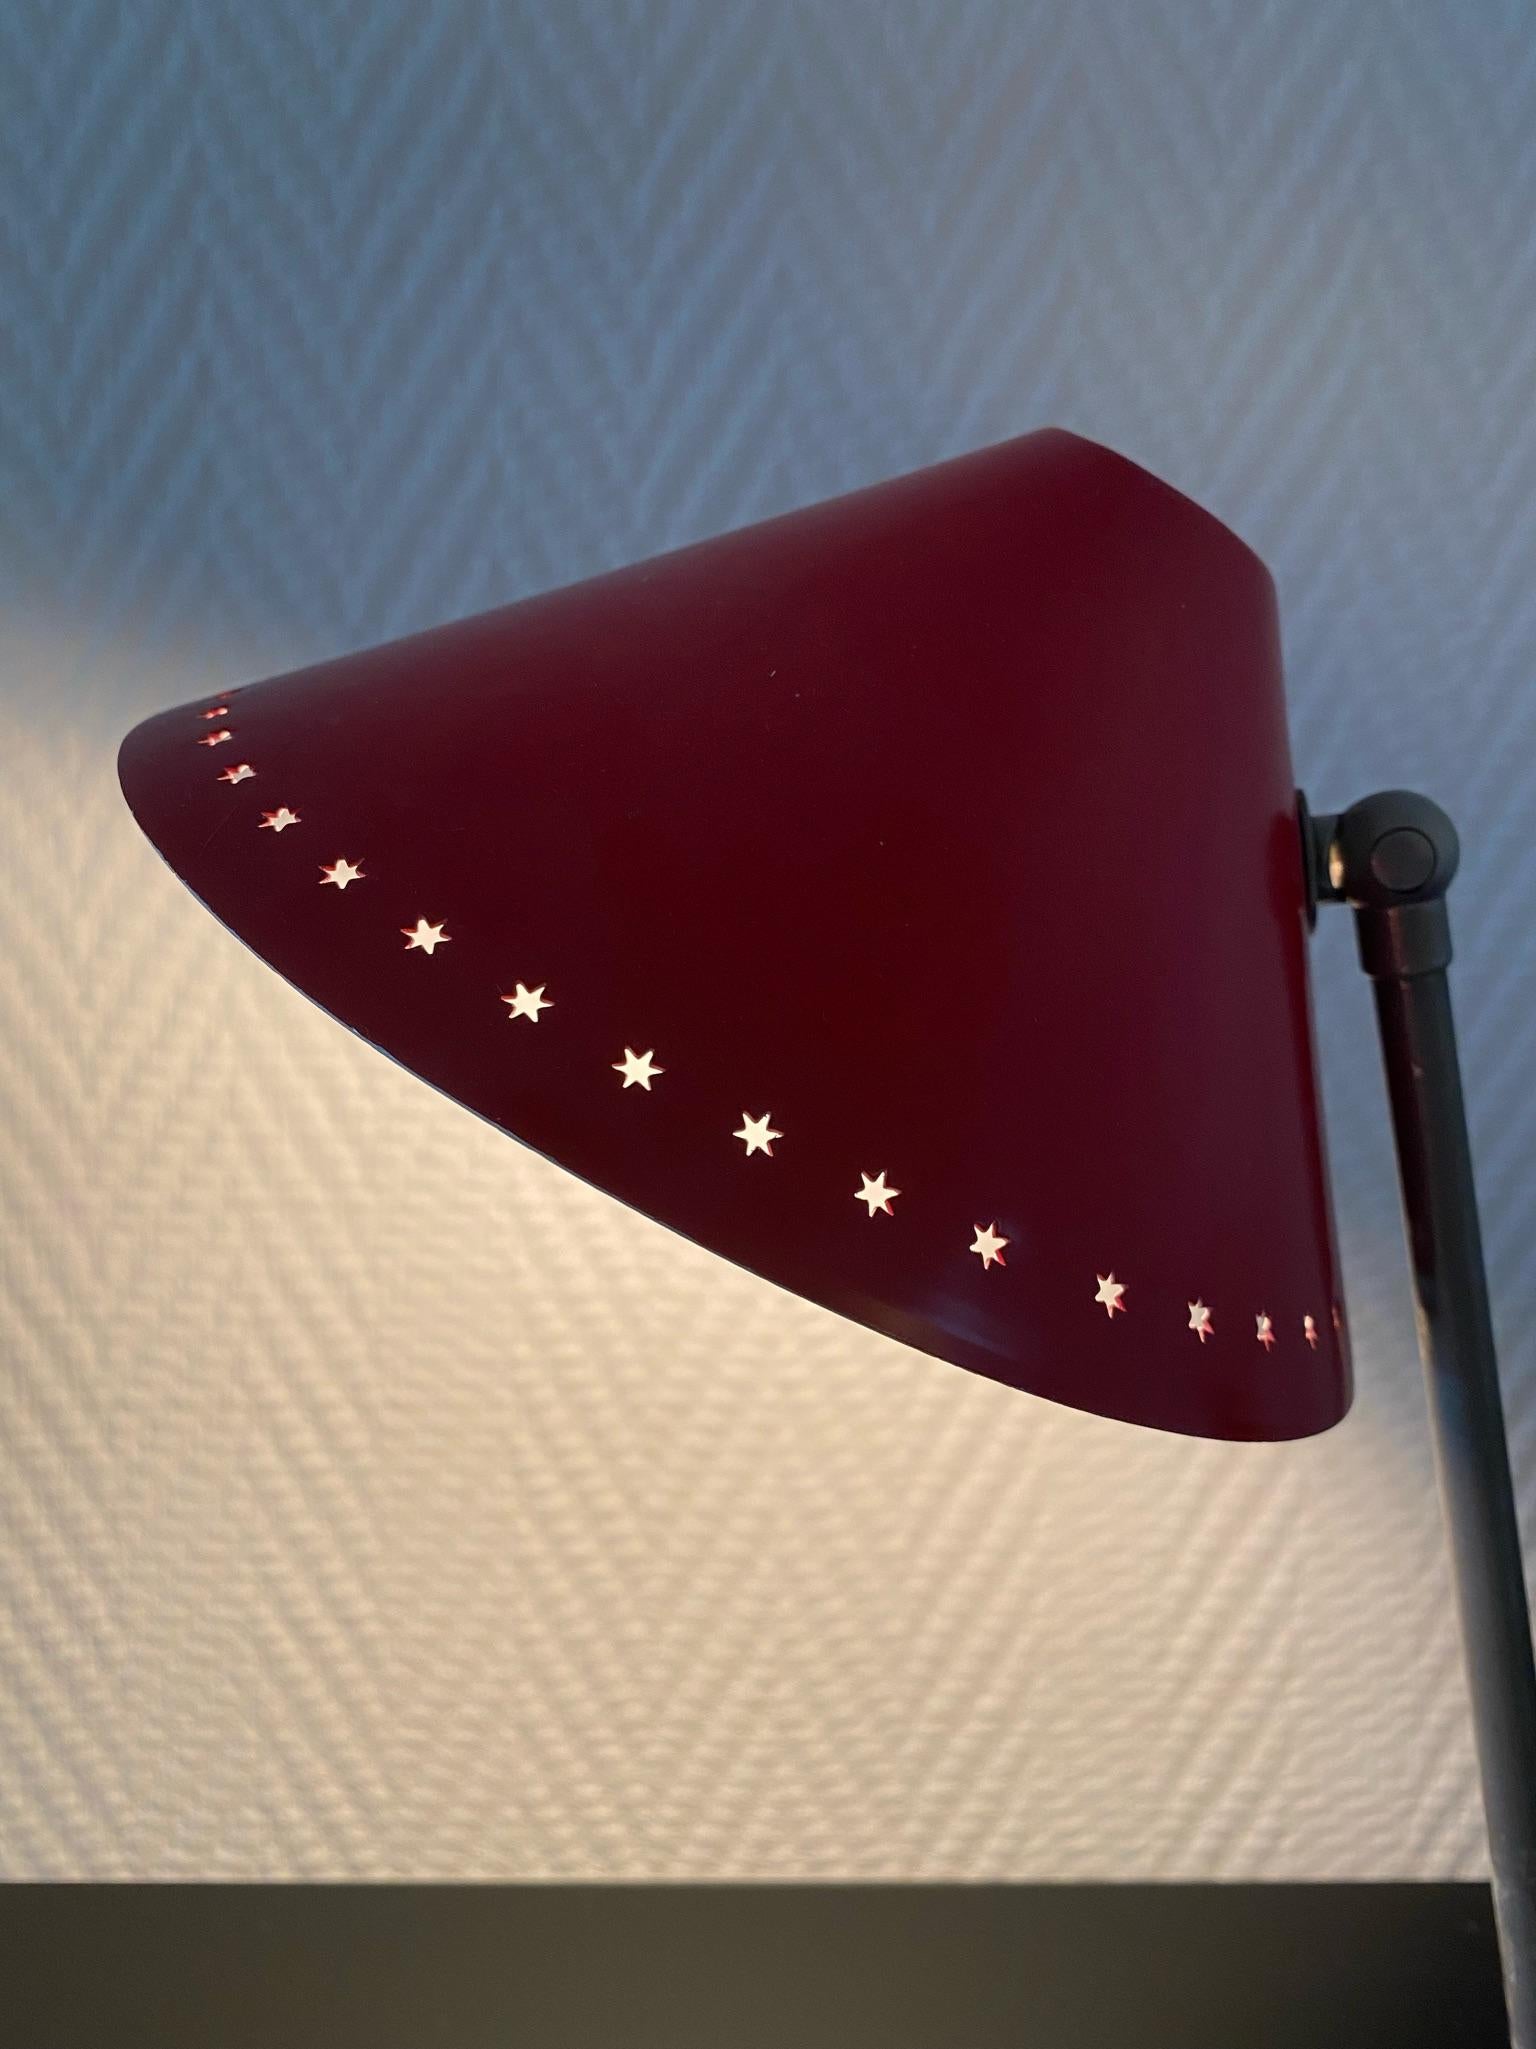 Red Metal Pinocchio Table and Wall Lamp by H. Busquet for Hala Zeist, Ca. 1950s For Sale 5